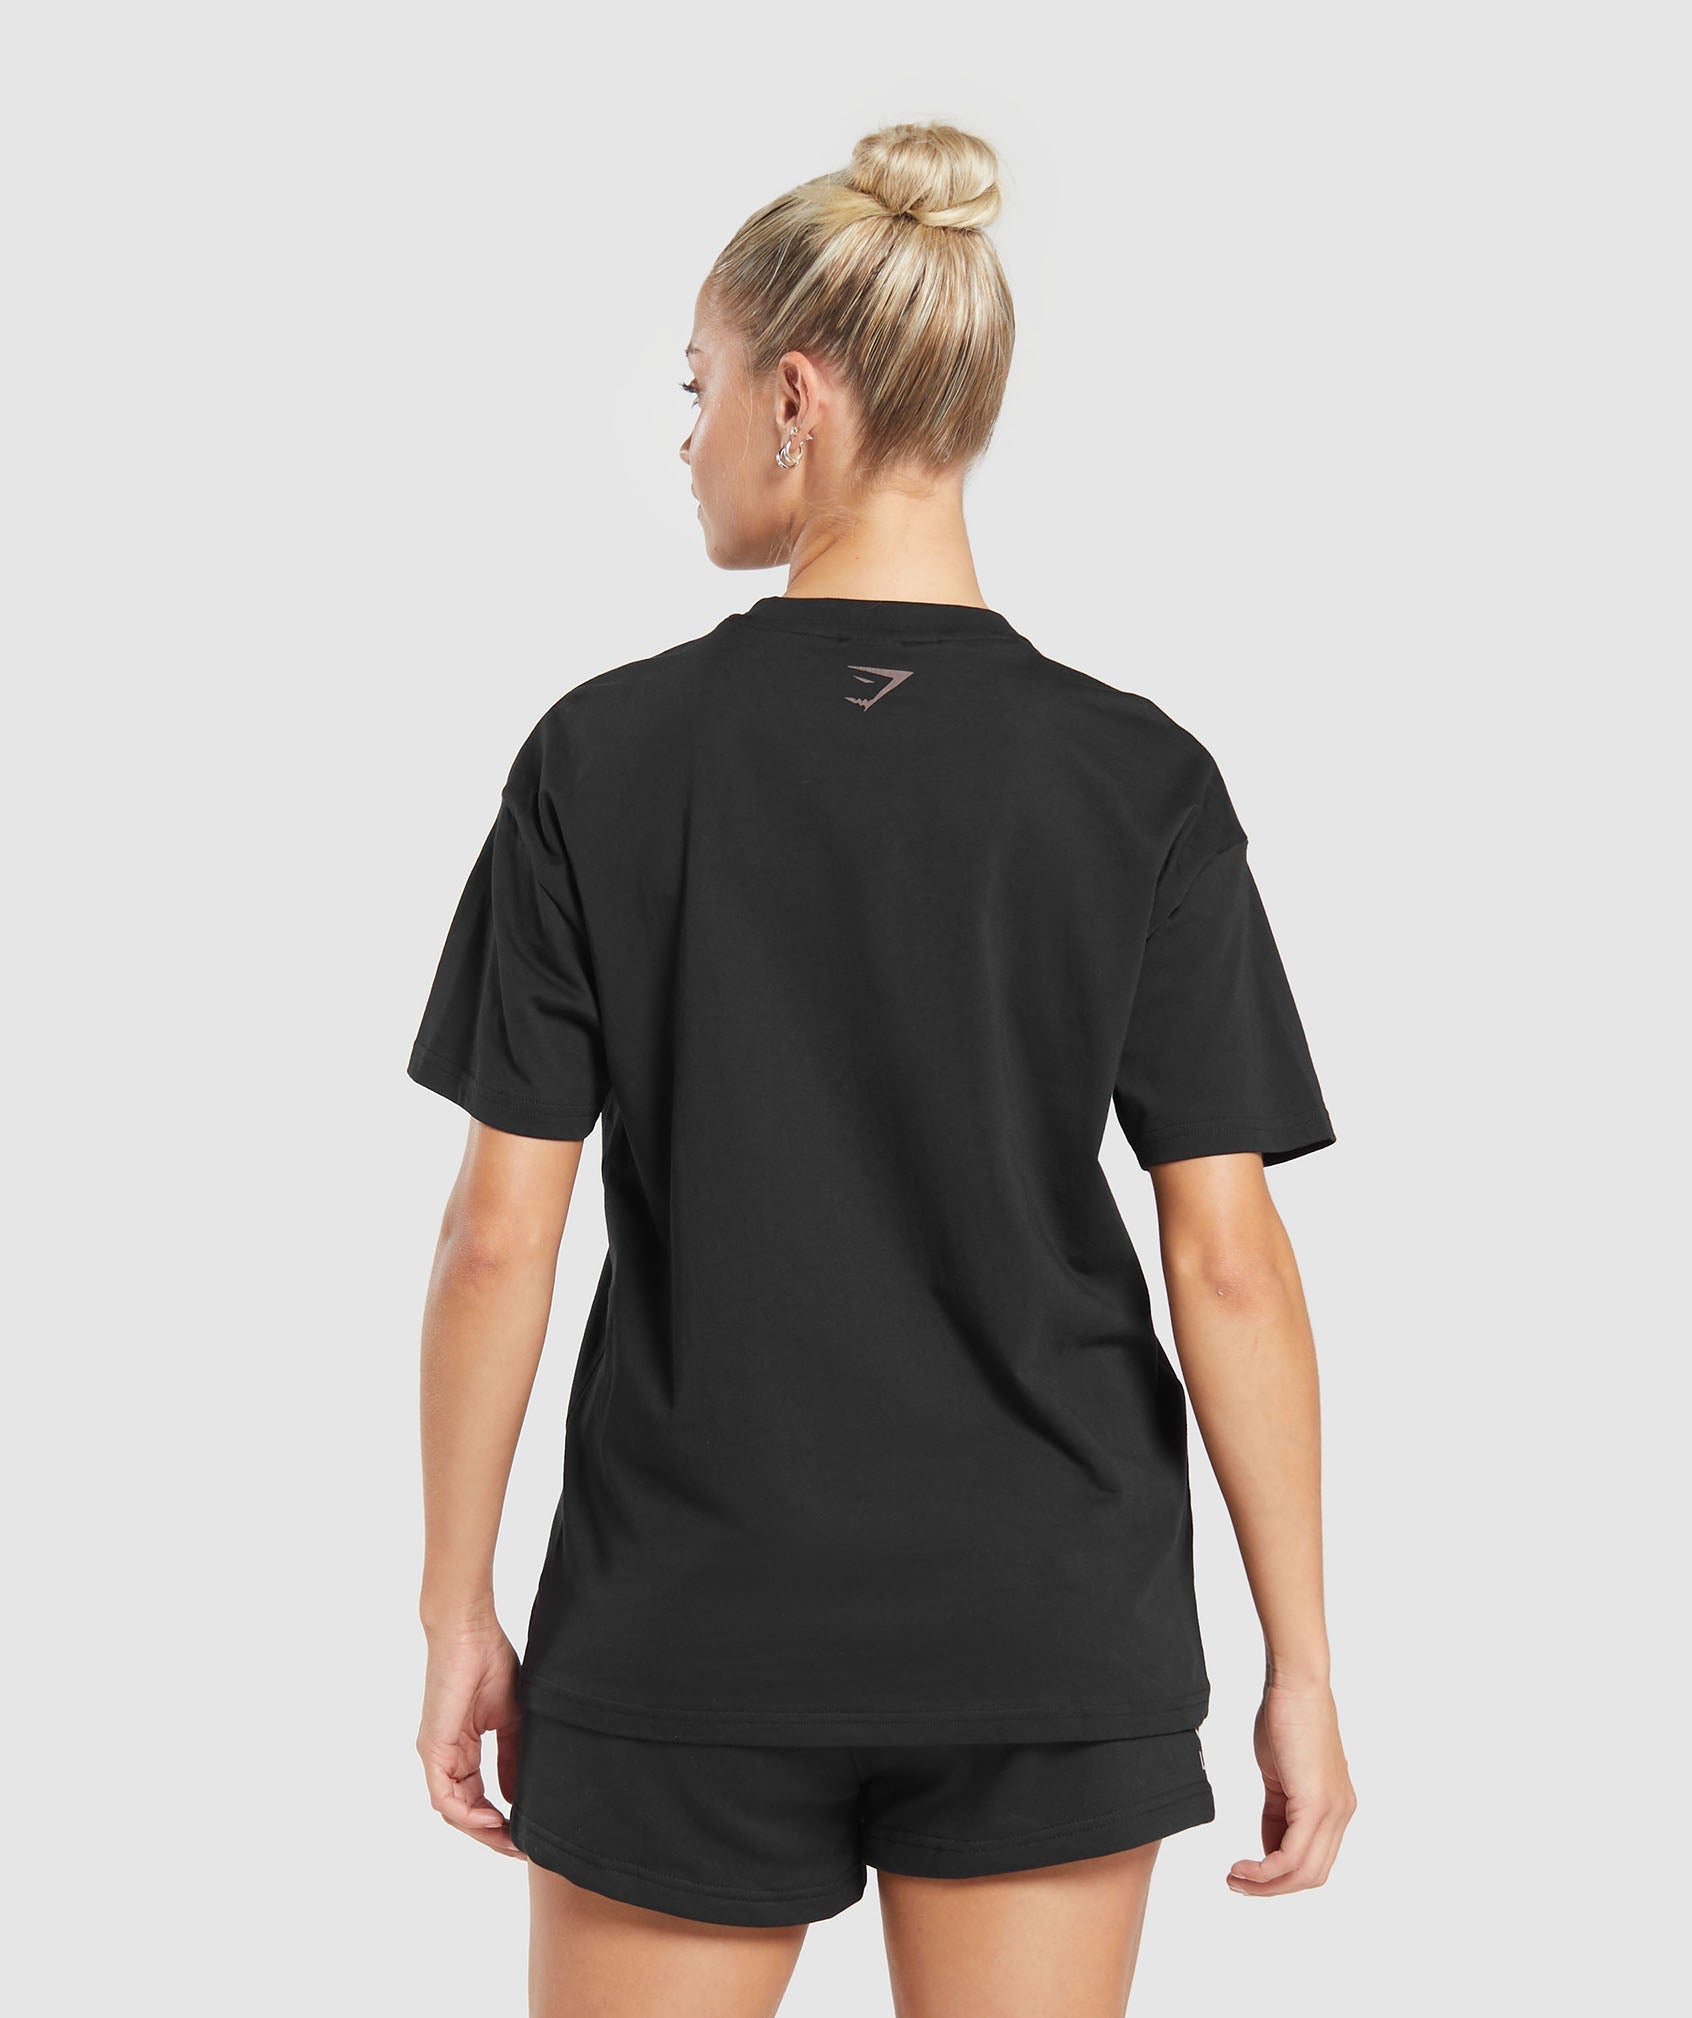 Built Oversized T-Shirt in Black - view 3